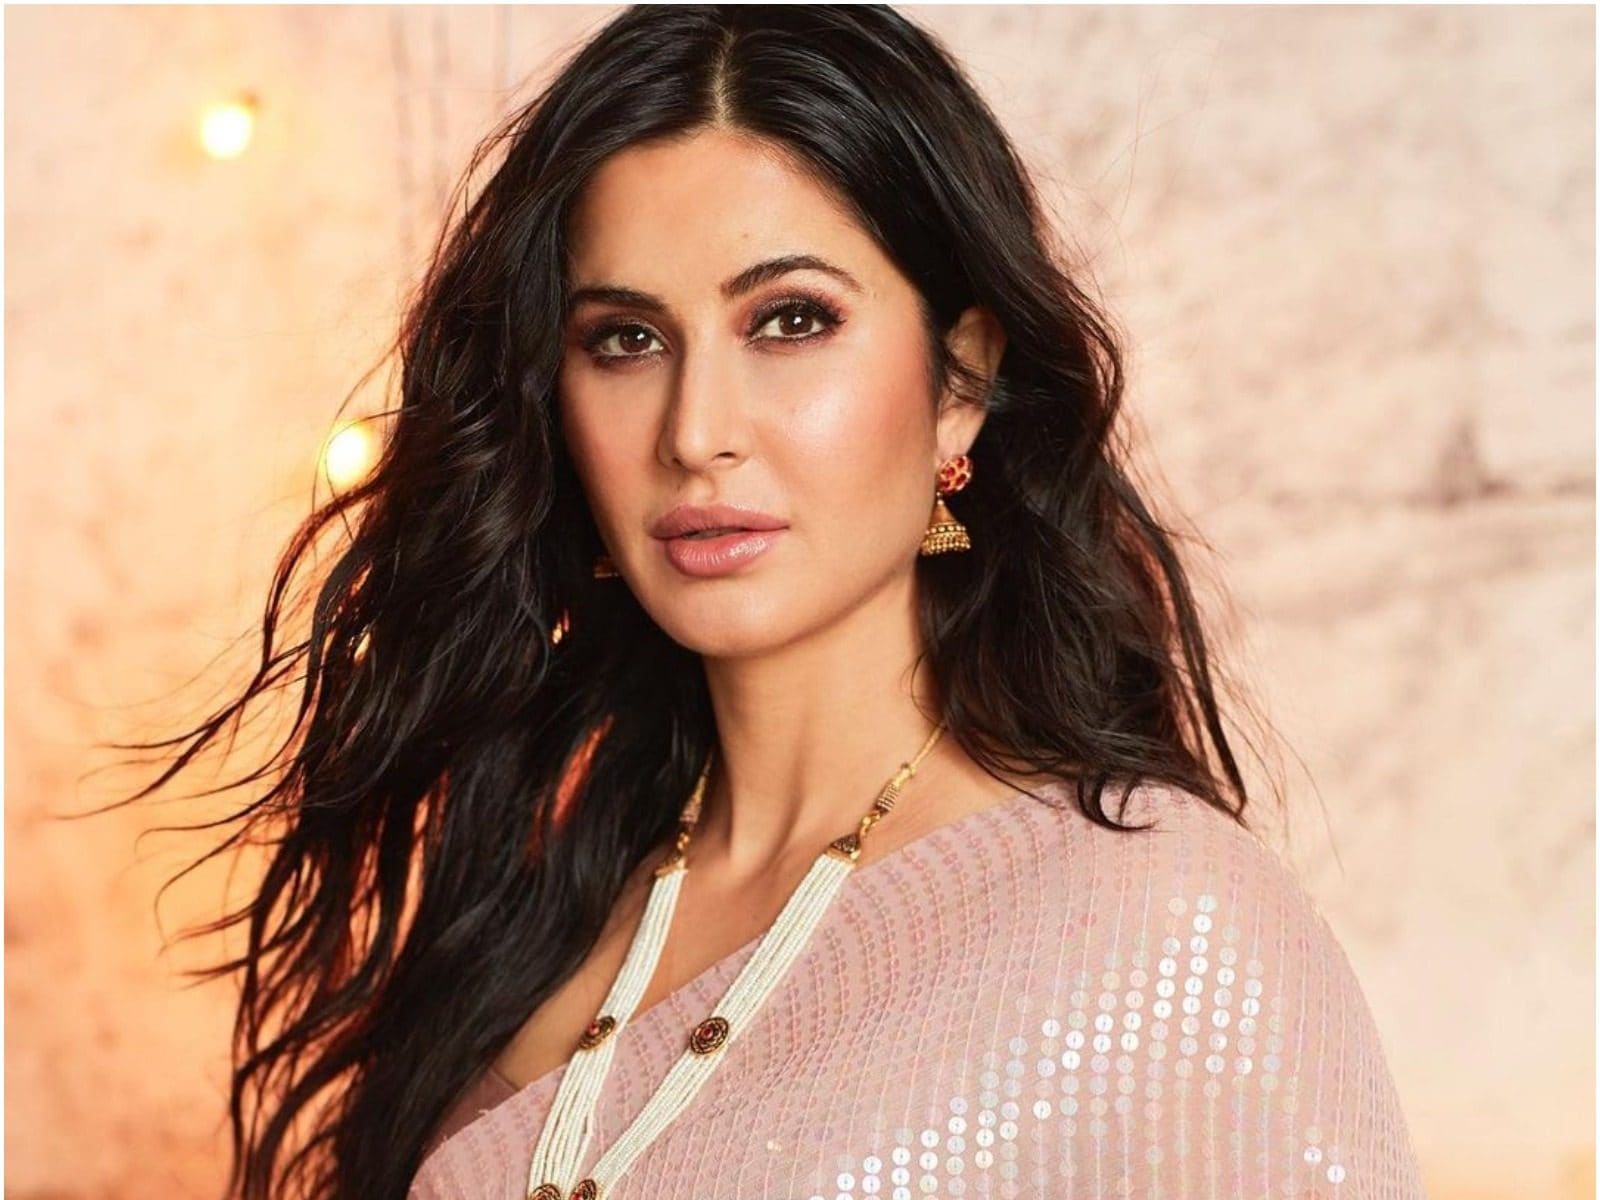 Katrina Kaif talks about her married life: 'It's been really beautiful'